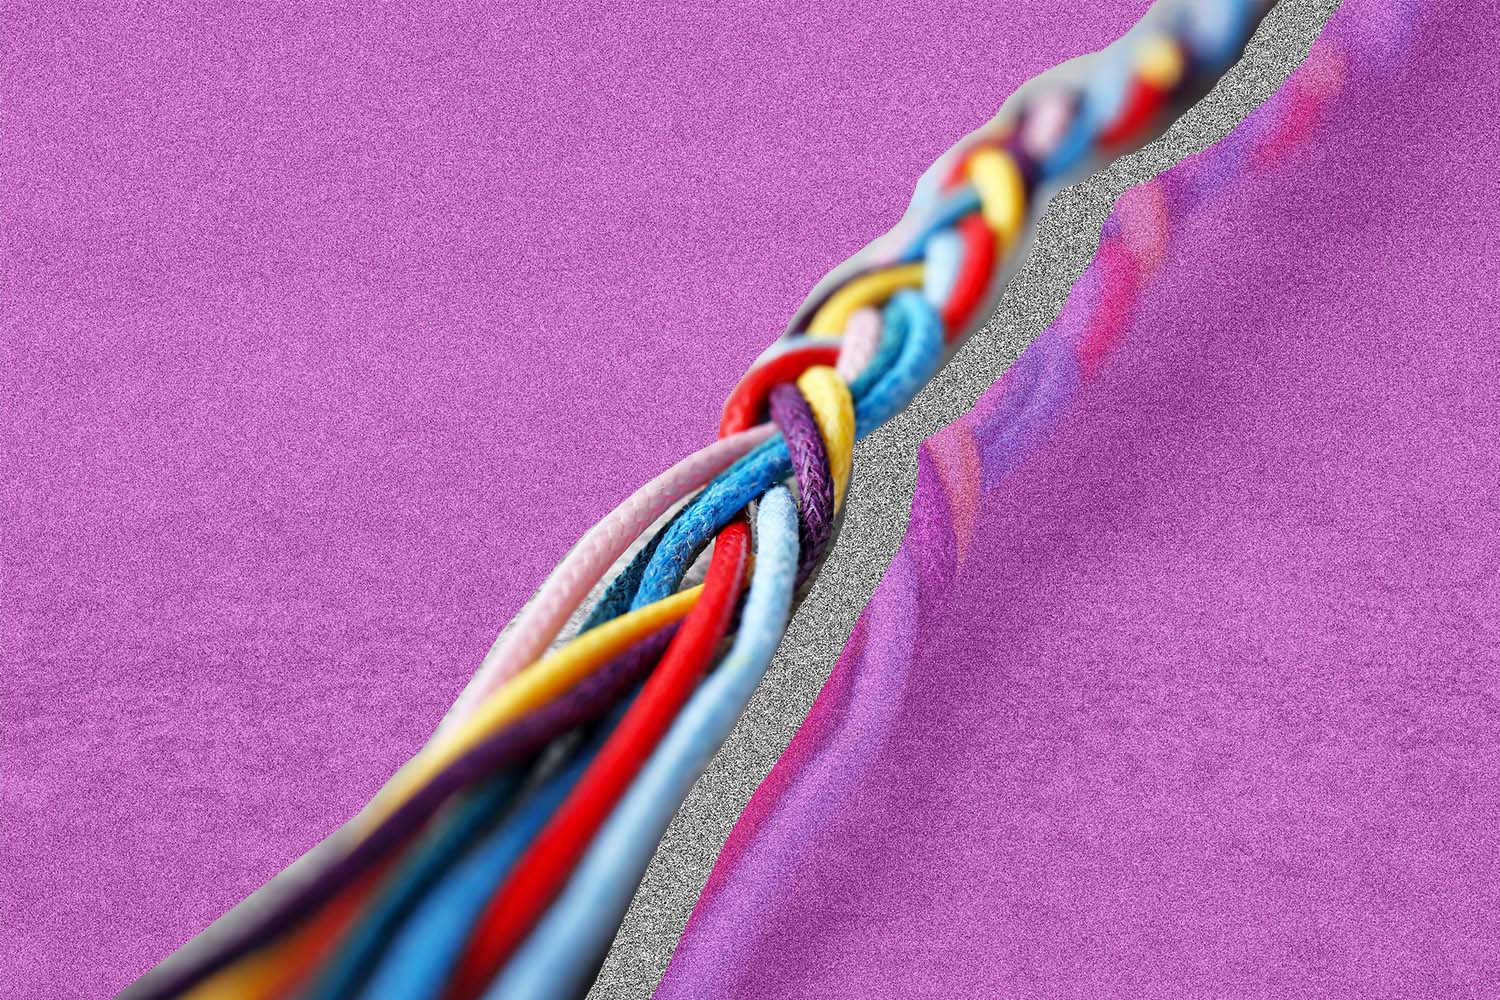 A braided rope of many colors